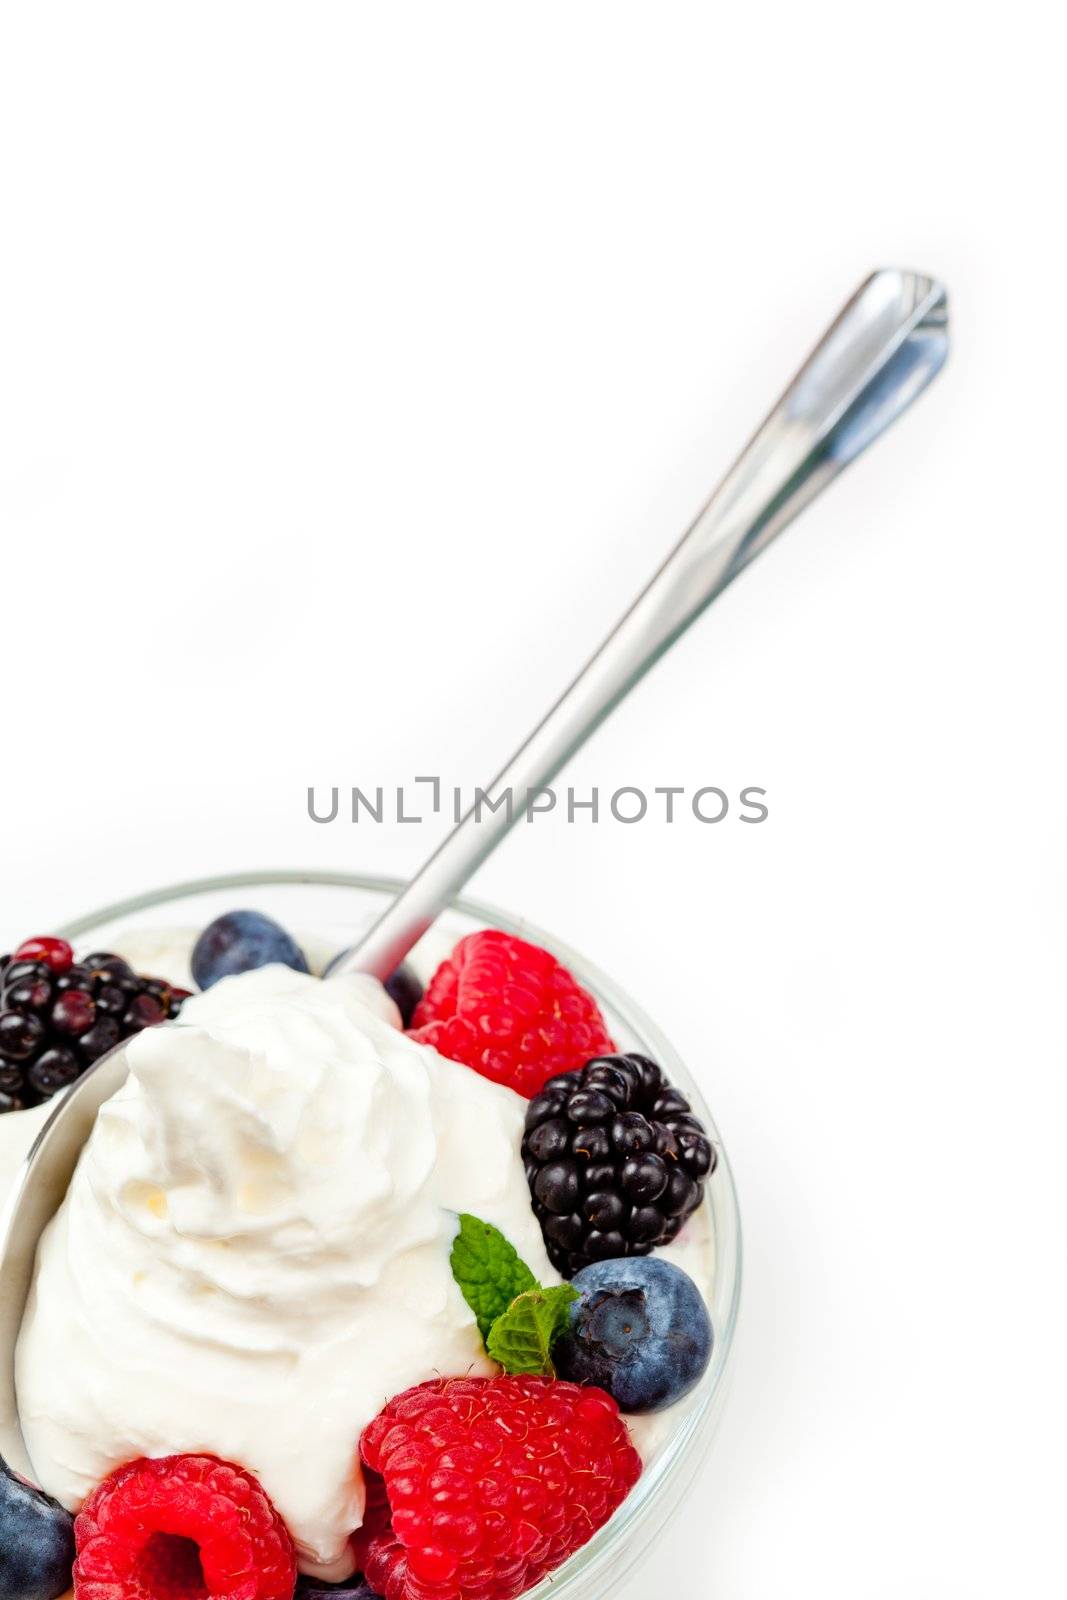 Dessert of berries against a white background